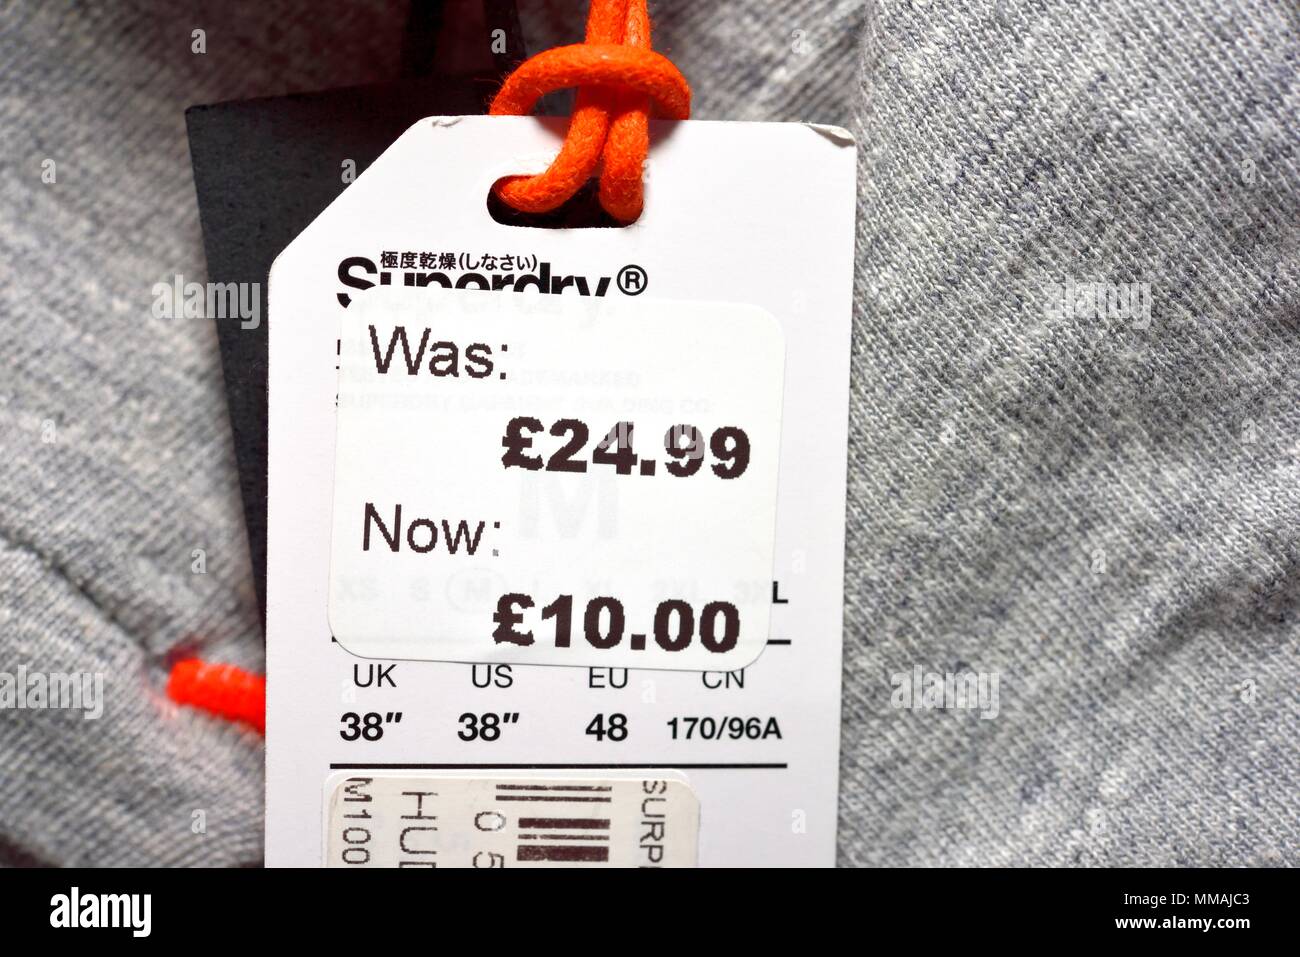 Was now reduced clothing pricing label Stock Photo